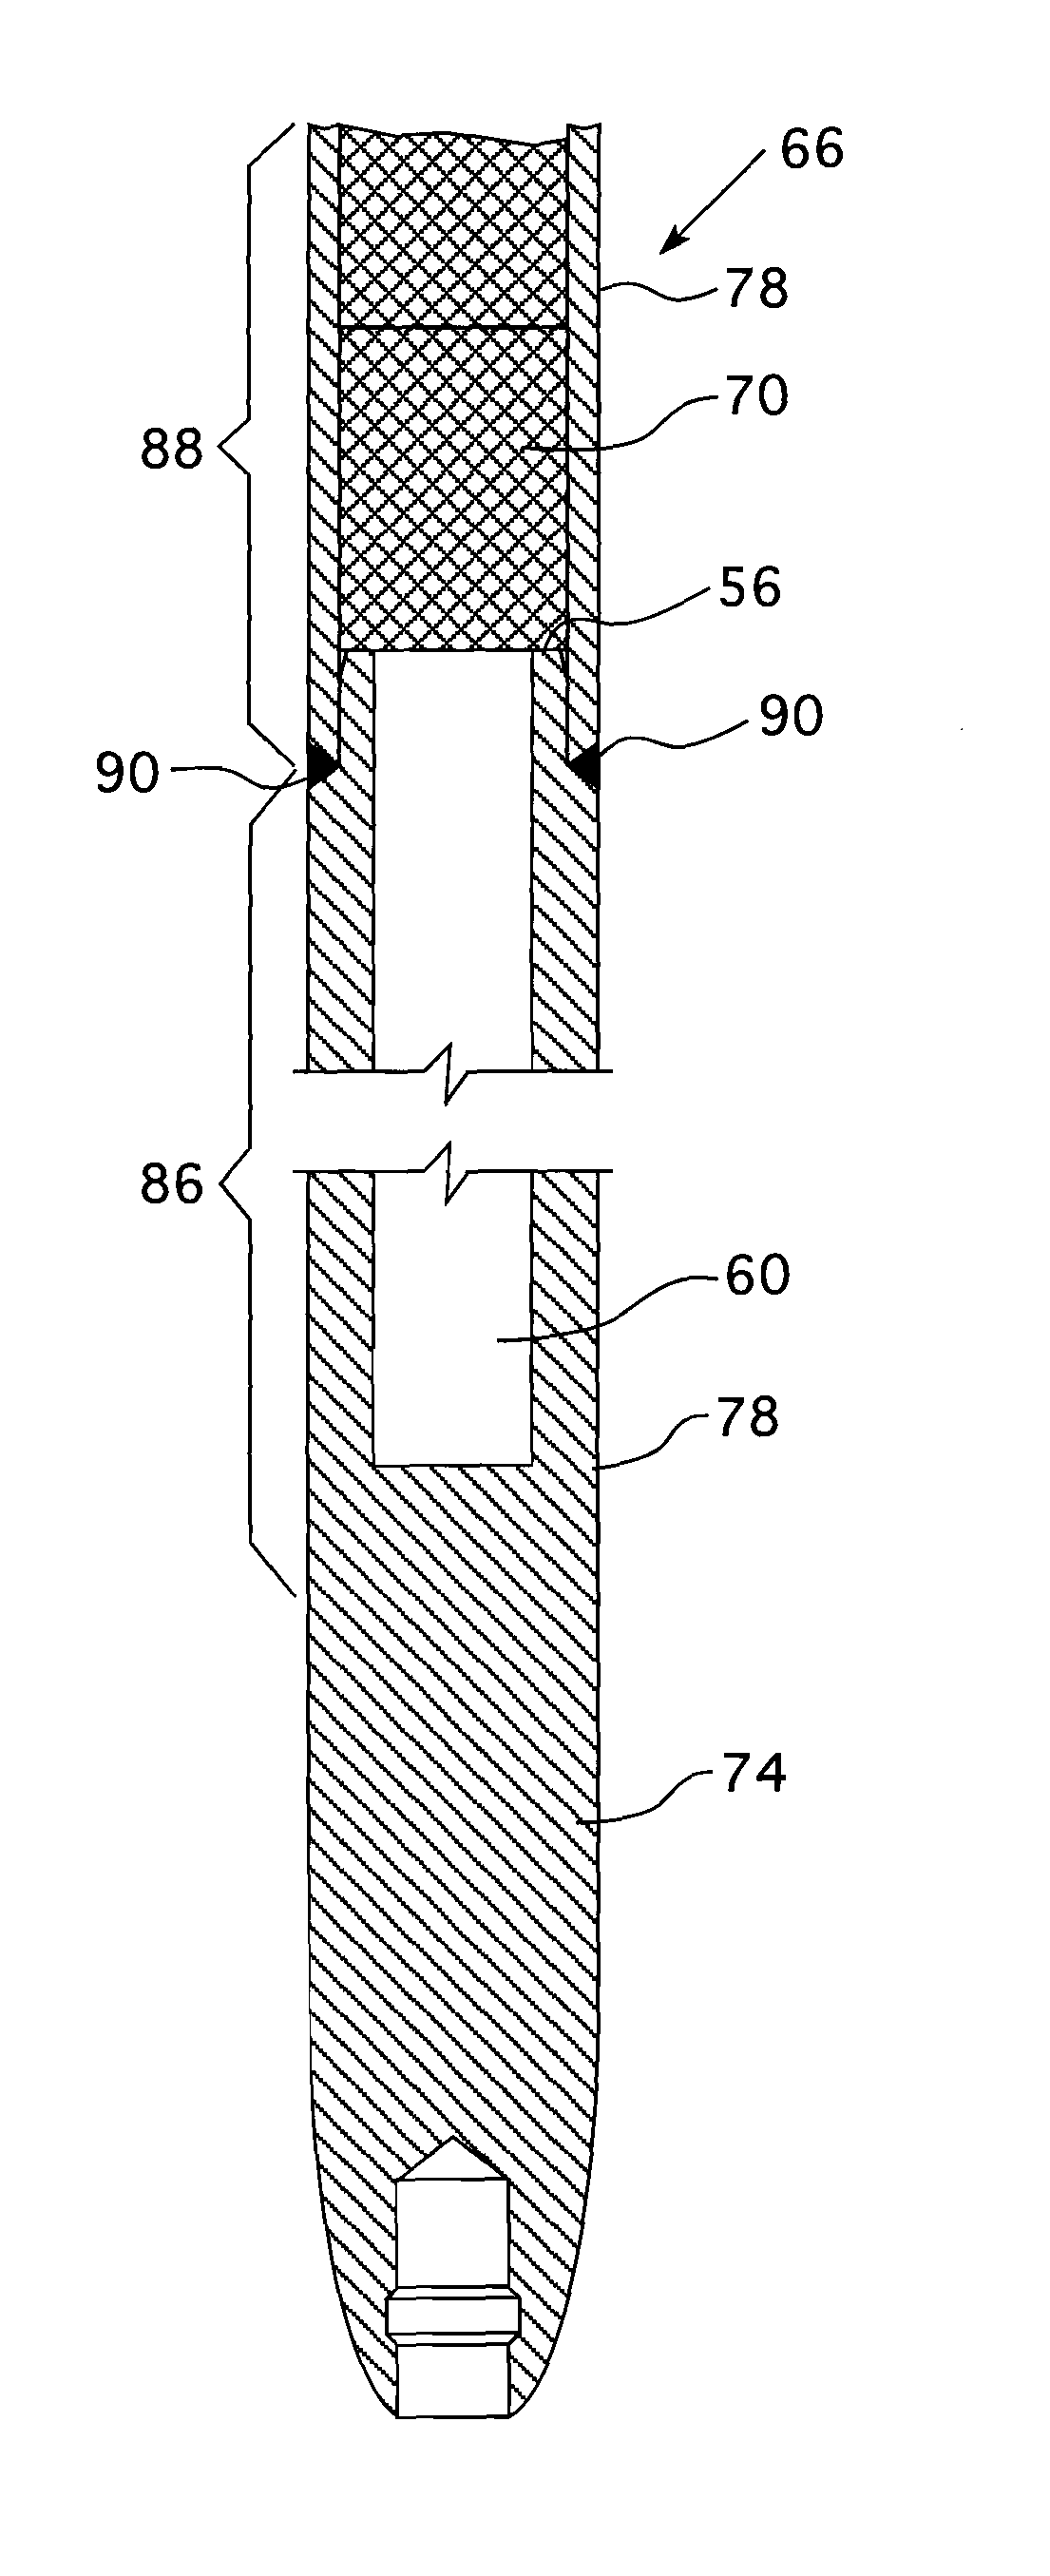 Nuclear fuel element and assembly